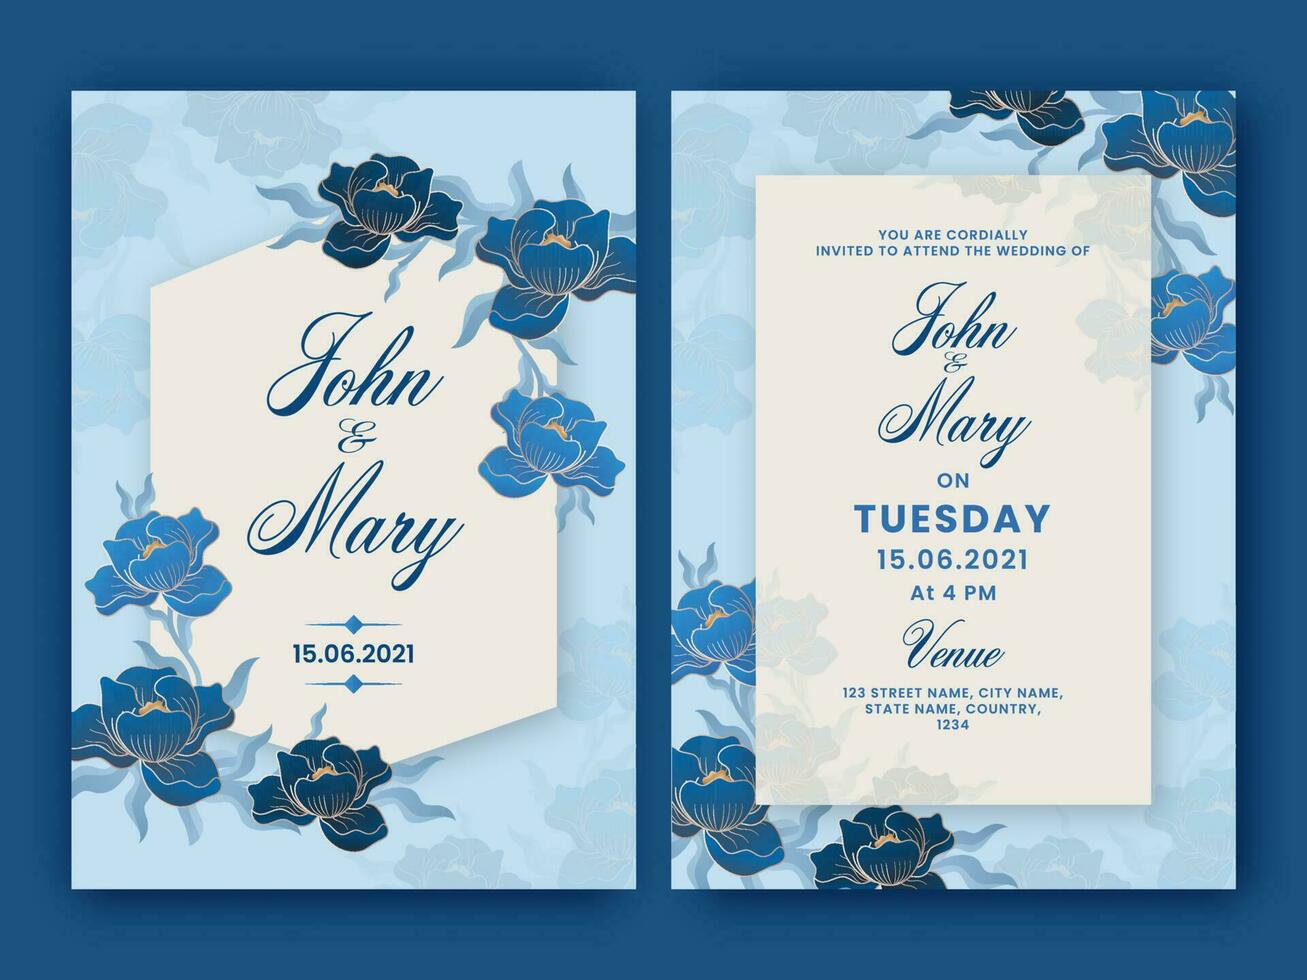 Floral Wedding Invitation Card With Venue Details In Front And Back Side. vector